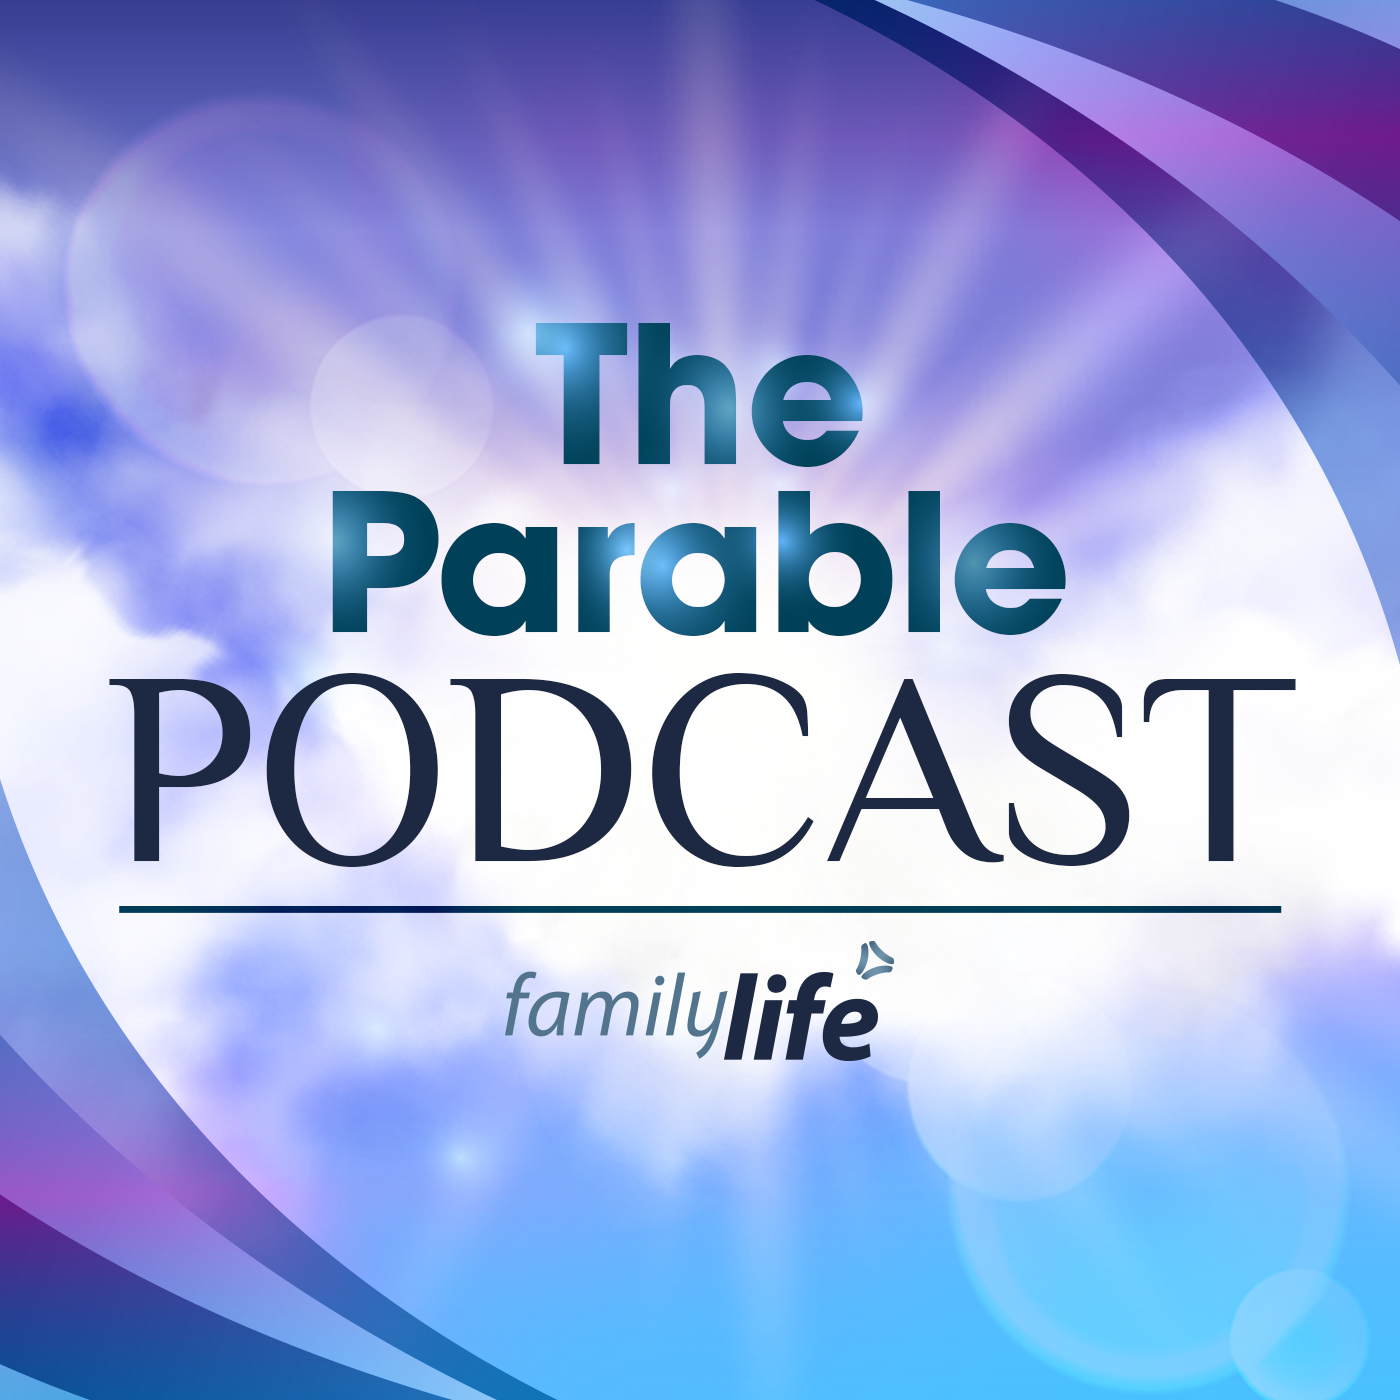 The Parable Podcast